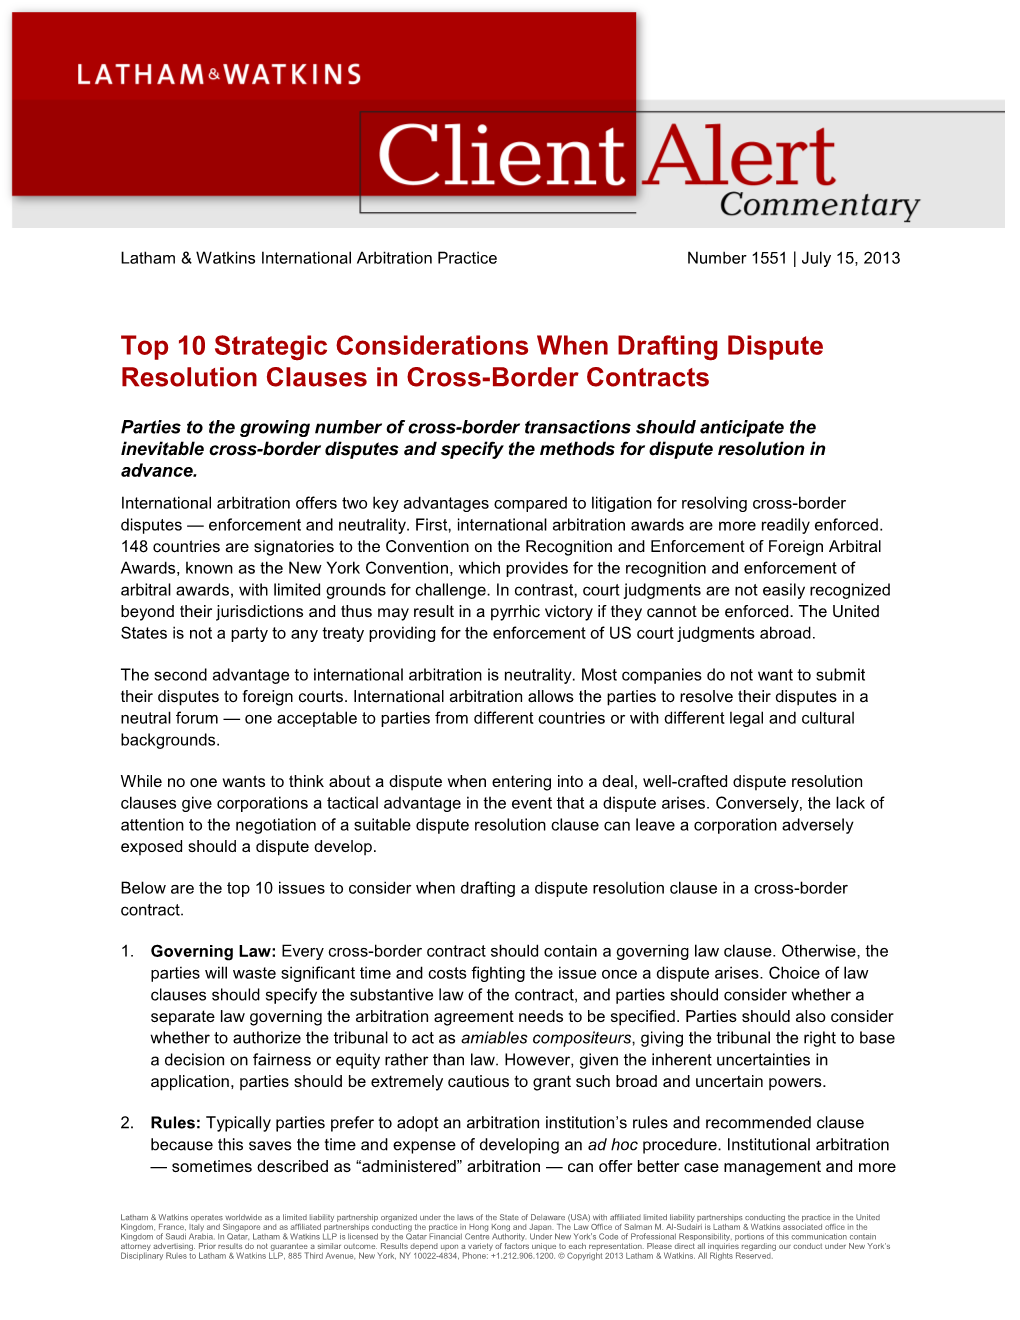 Top 10 Strategic Considerations When Drafting Dispute Resolution Clauses in Cross-Border Contracts